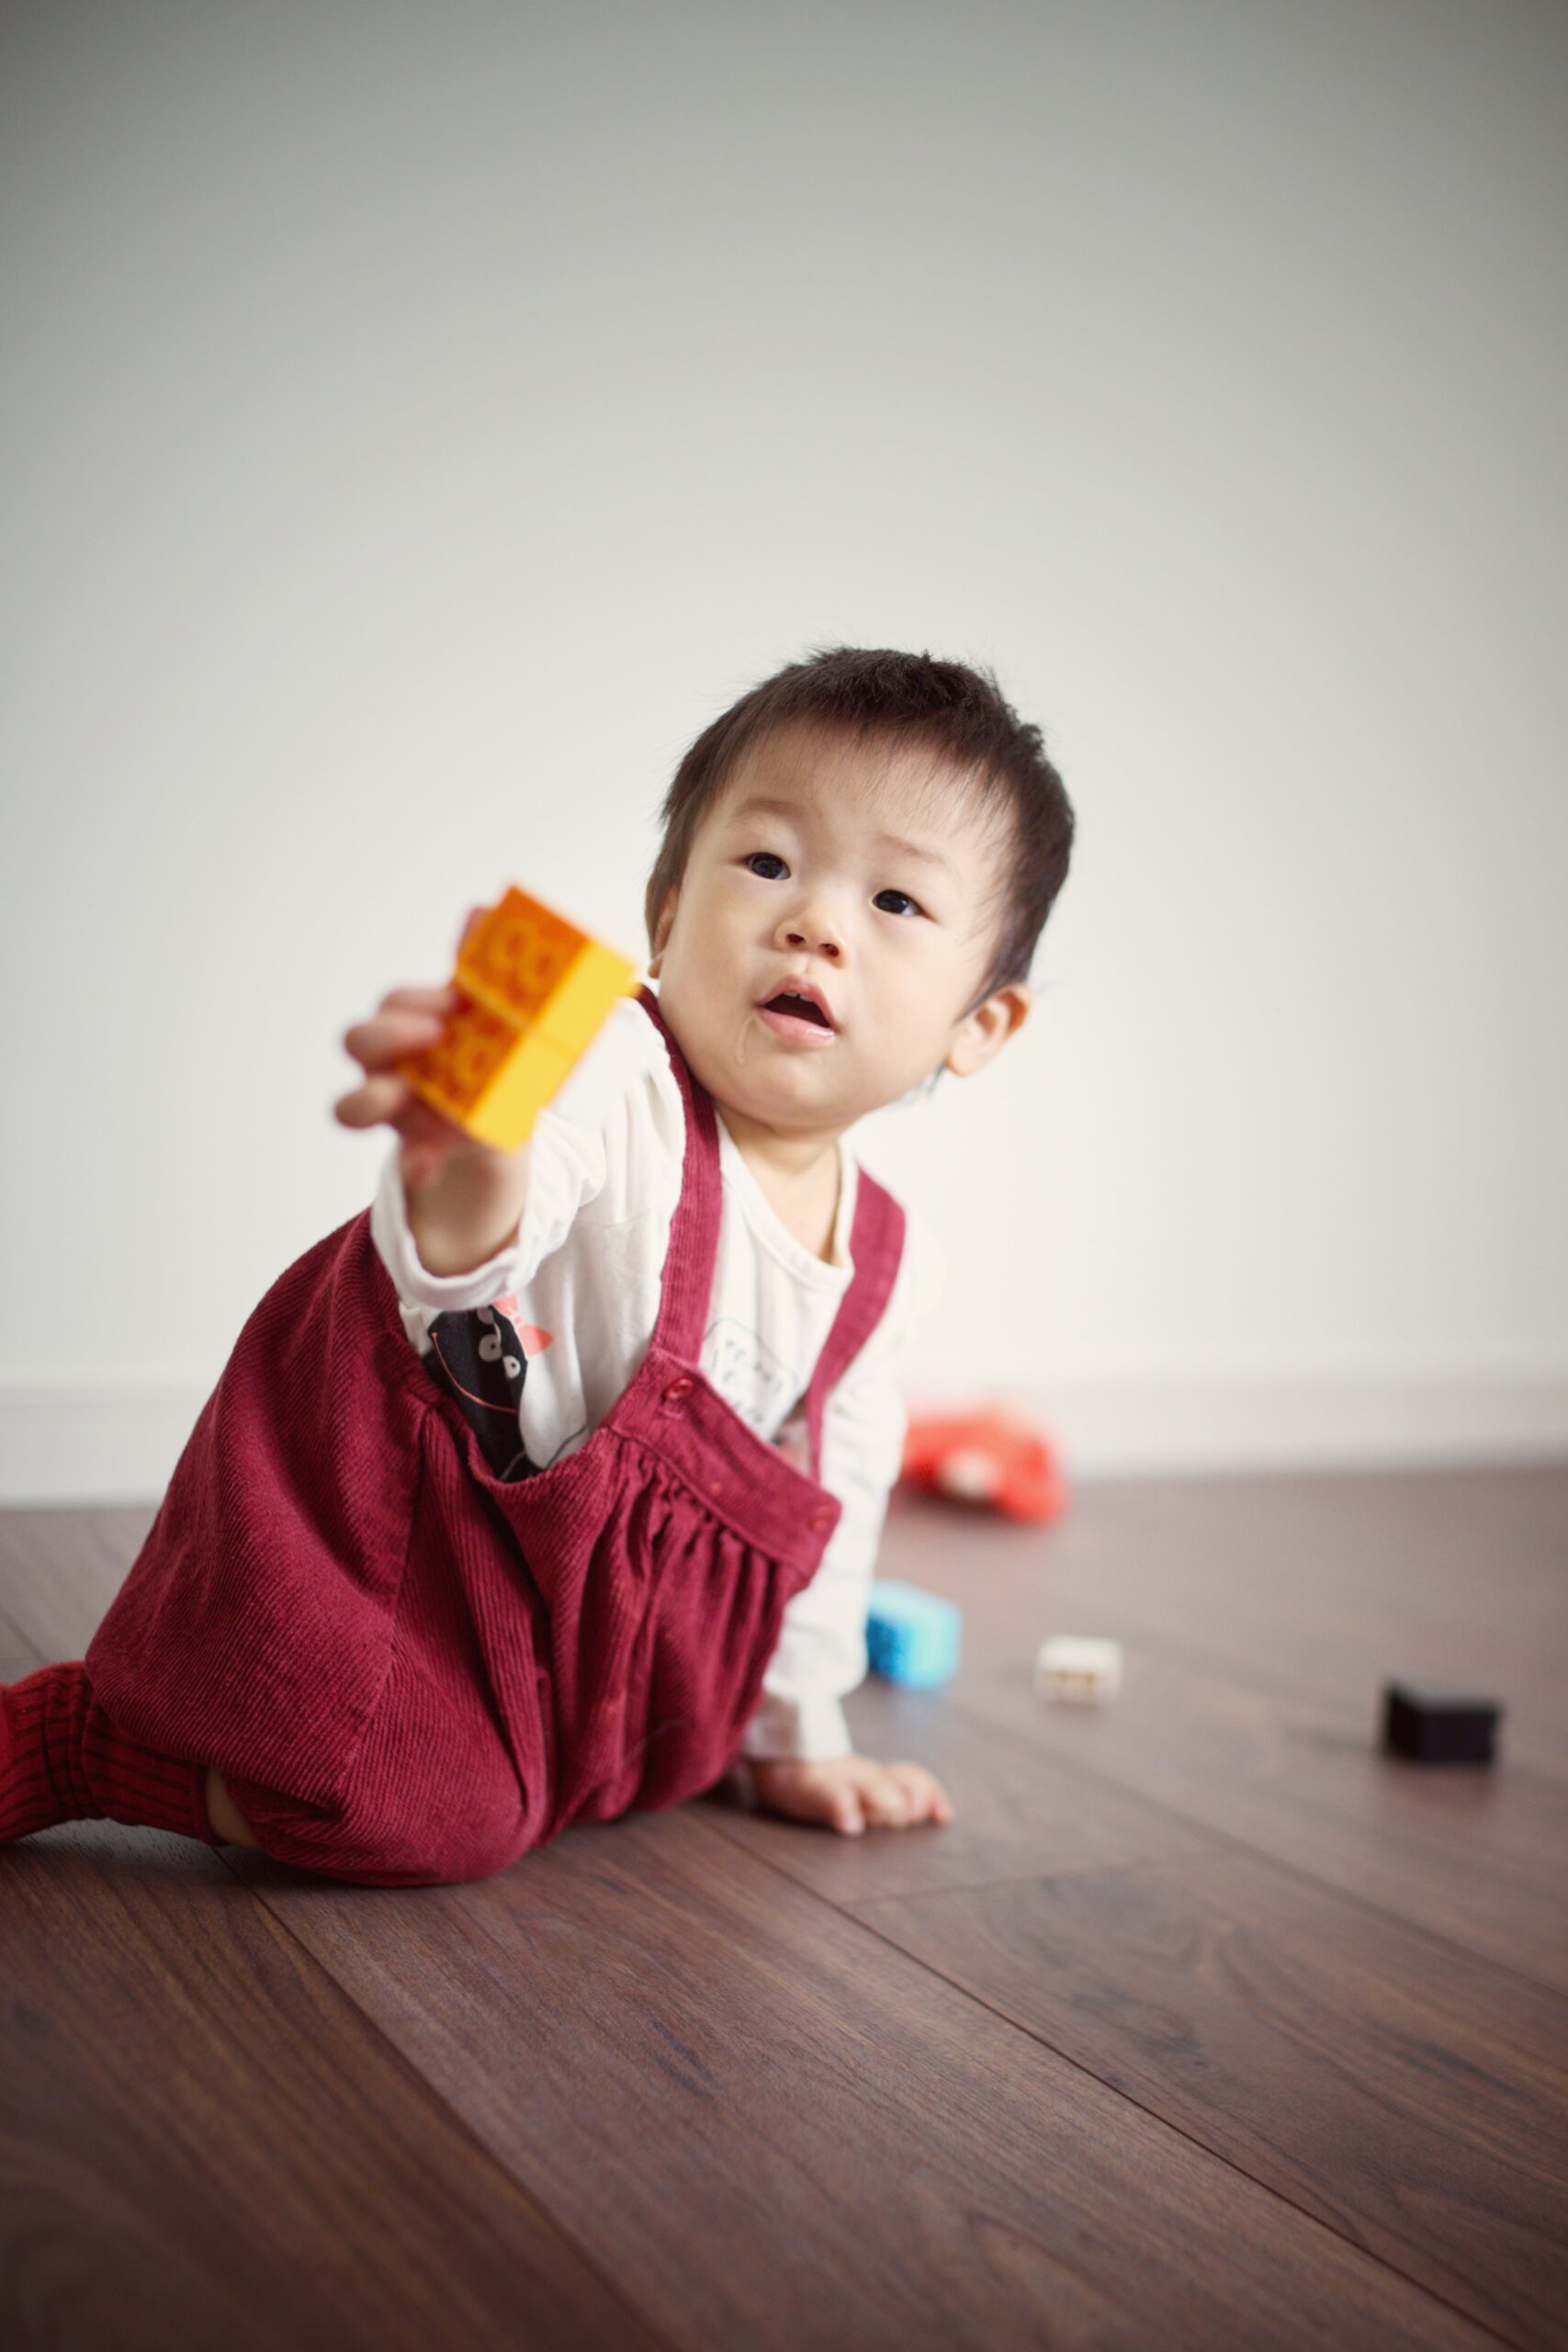 The first tip to babyproof your home is to use rugs on hardwood floors.